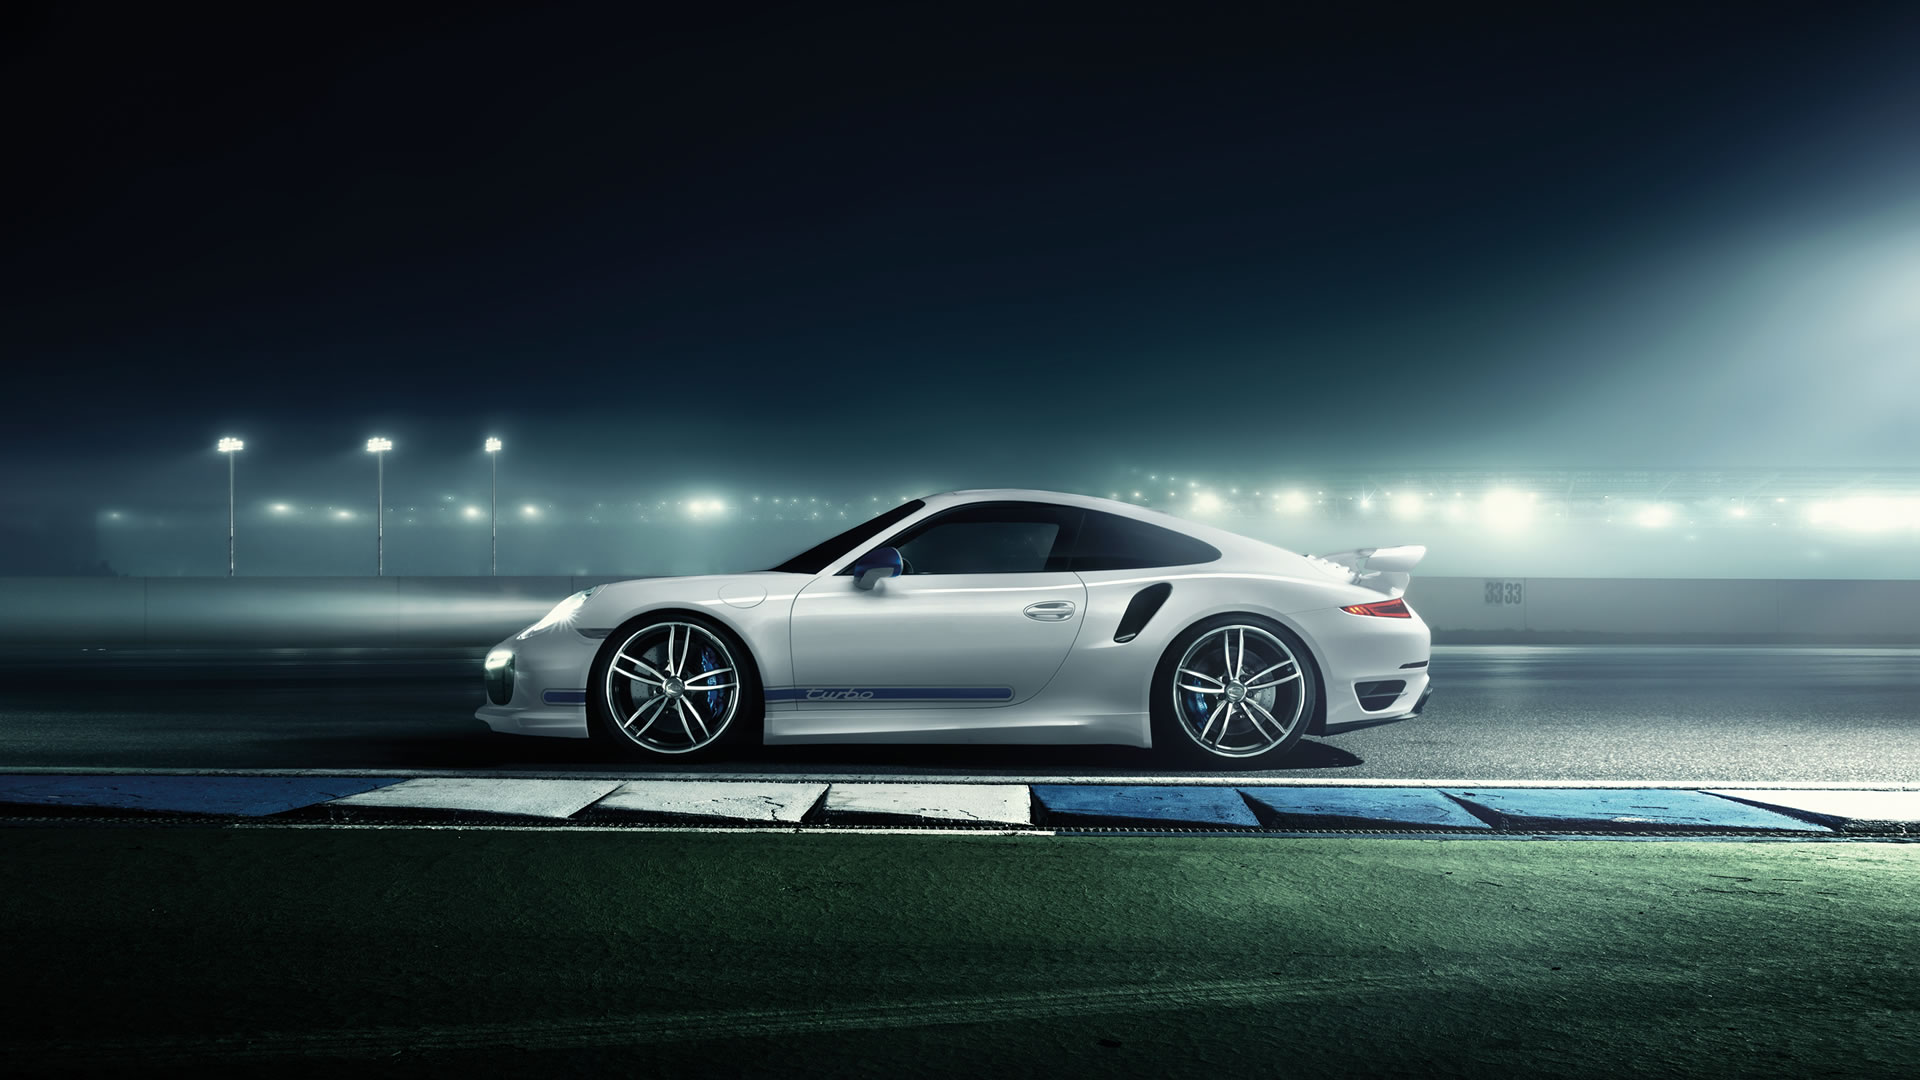 Porsche Turbo Wallpaper And Background Image